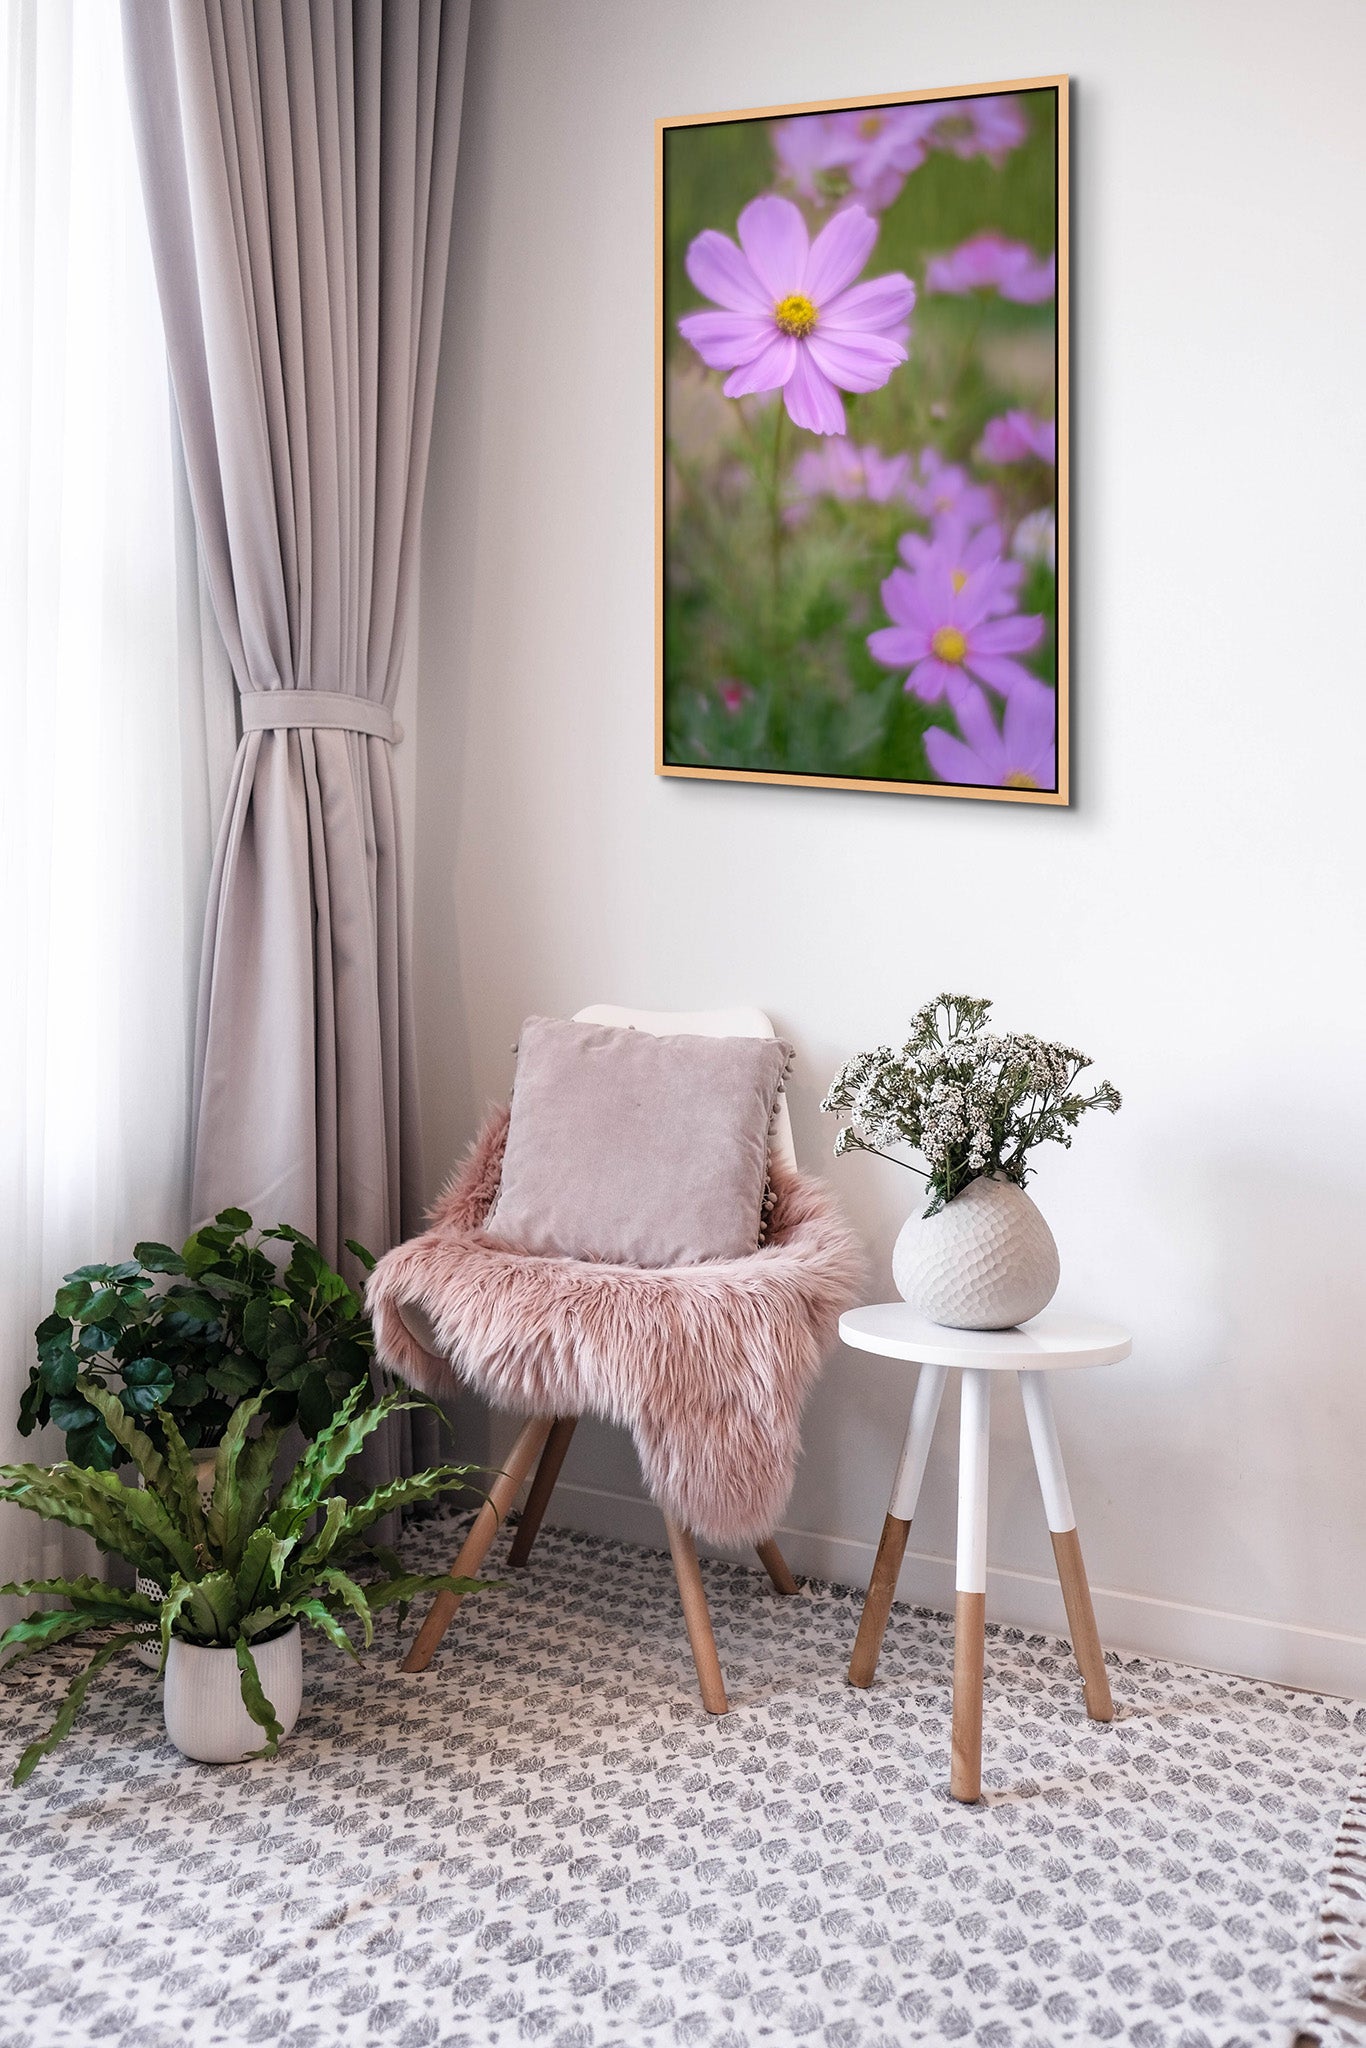 Float frame picture hanging on the wall of a room with a chair and window. The chair has a fuzzy blanket on it. Light is shining through the window. The picture is a fine art flower photograph of a purple Cosmopolitan flower by Cameron Dreaux.